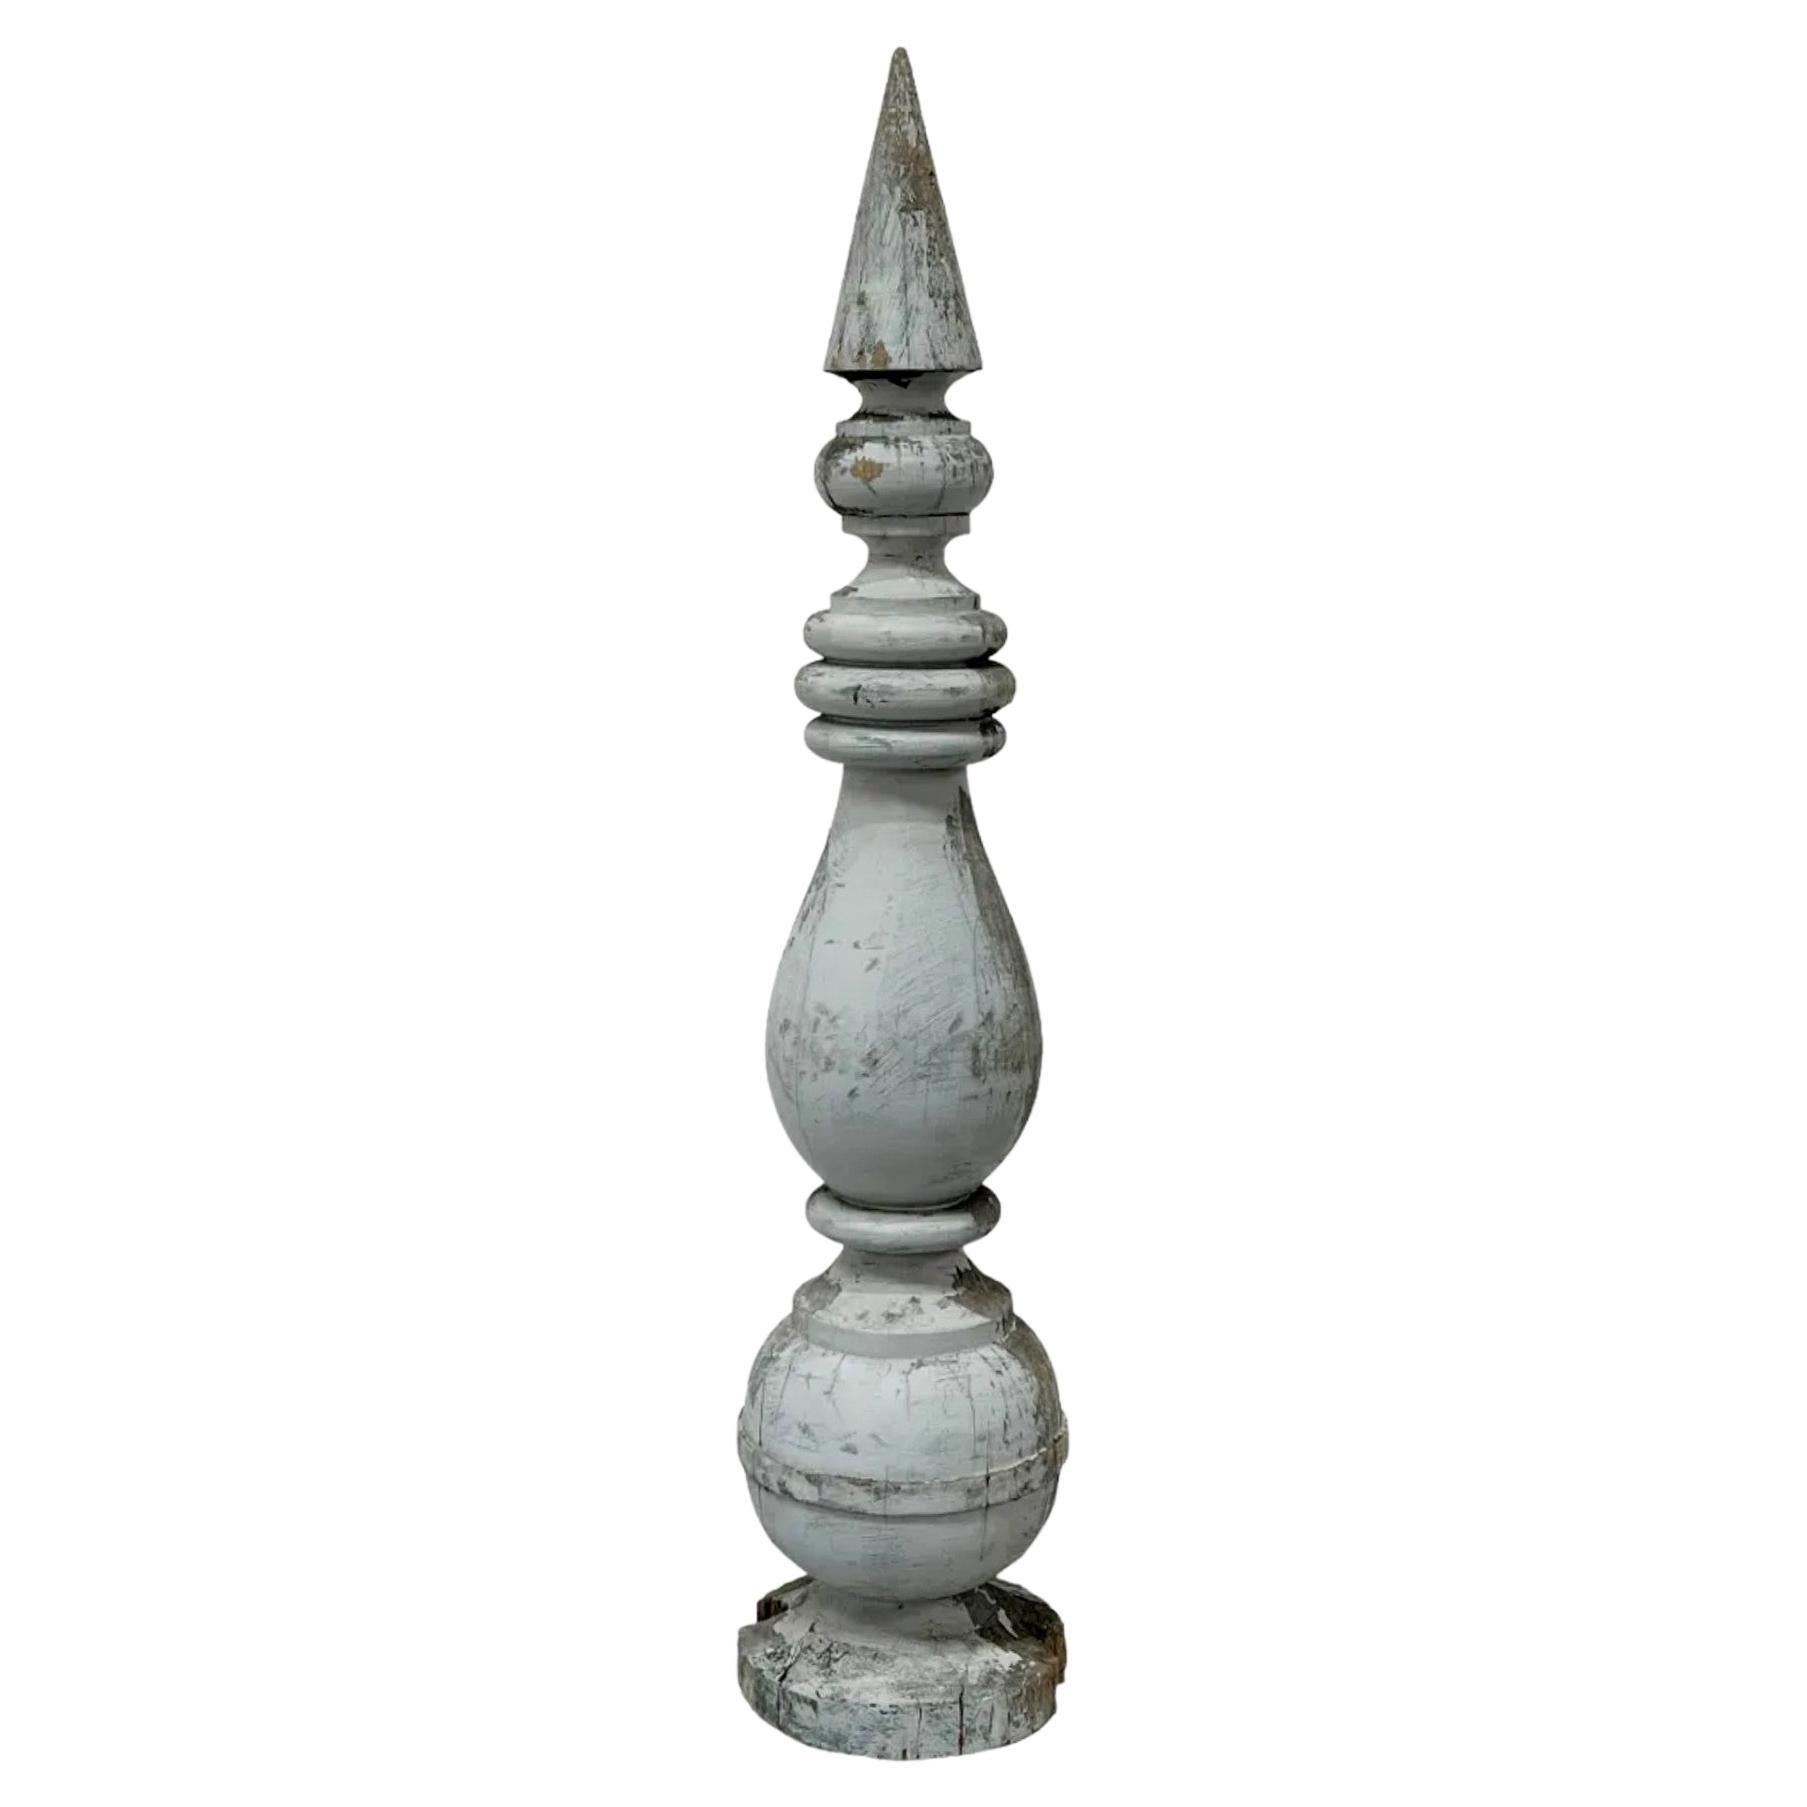 Tall 19th Century Architectural Painted Wood Finial